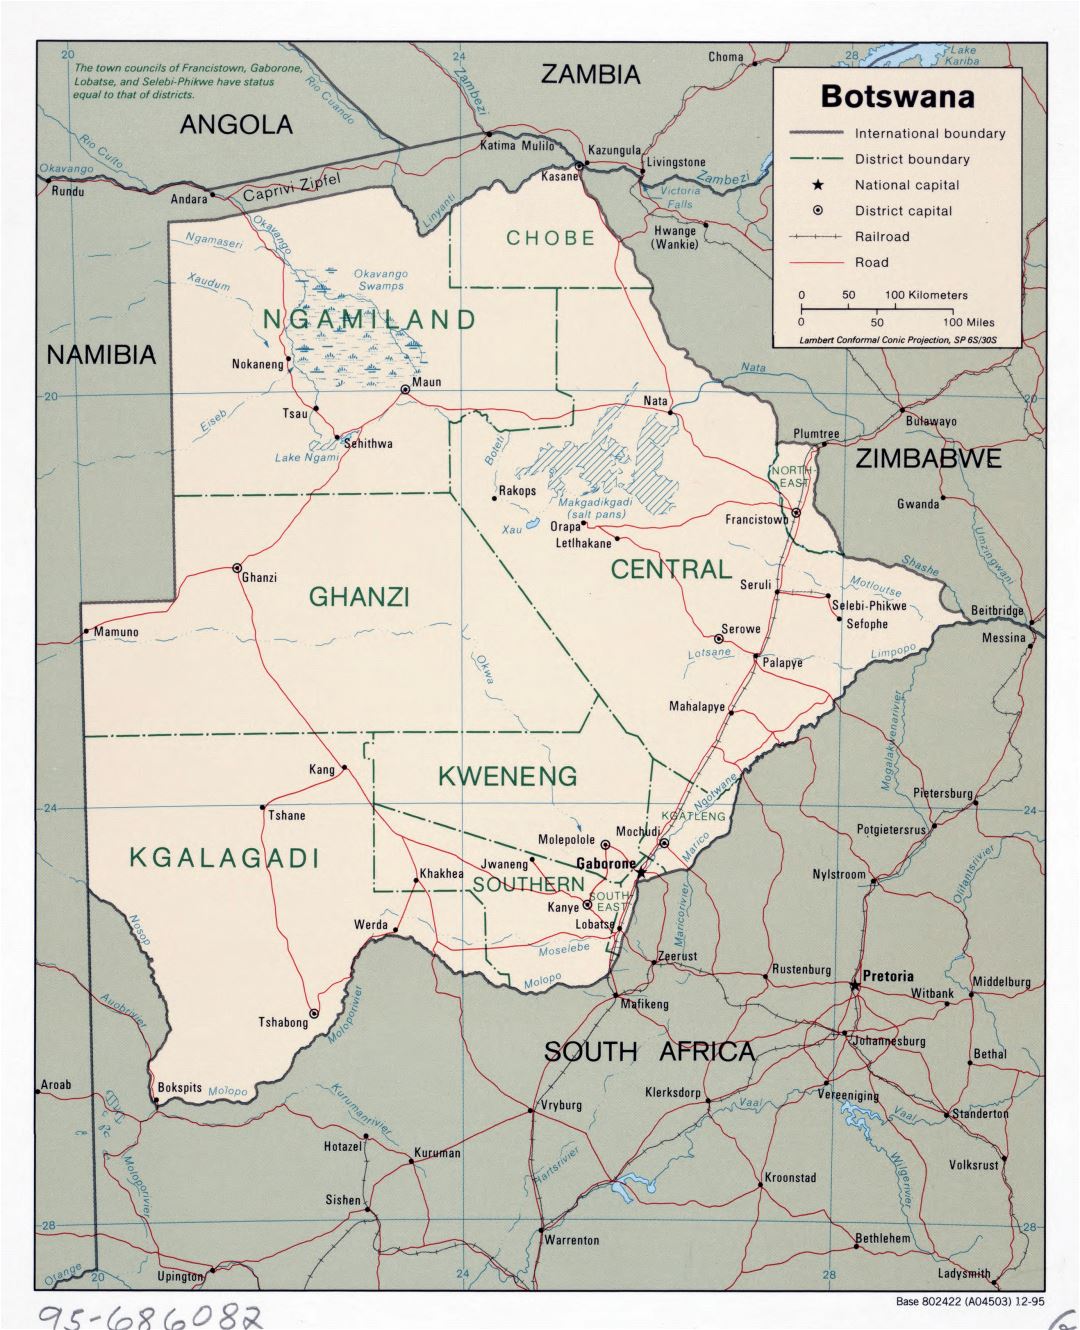 Large scale political and administrative map of Botswana with roads, railroads and major cities - 1995